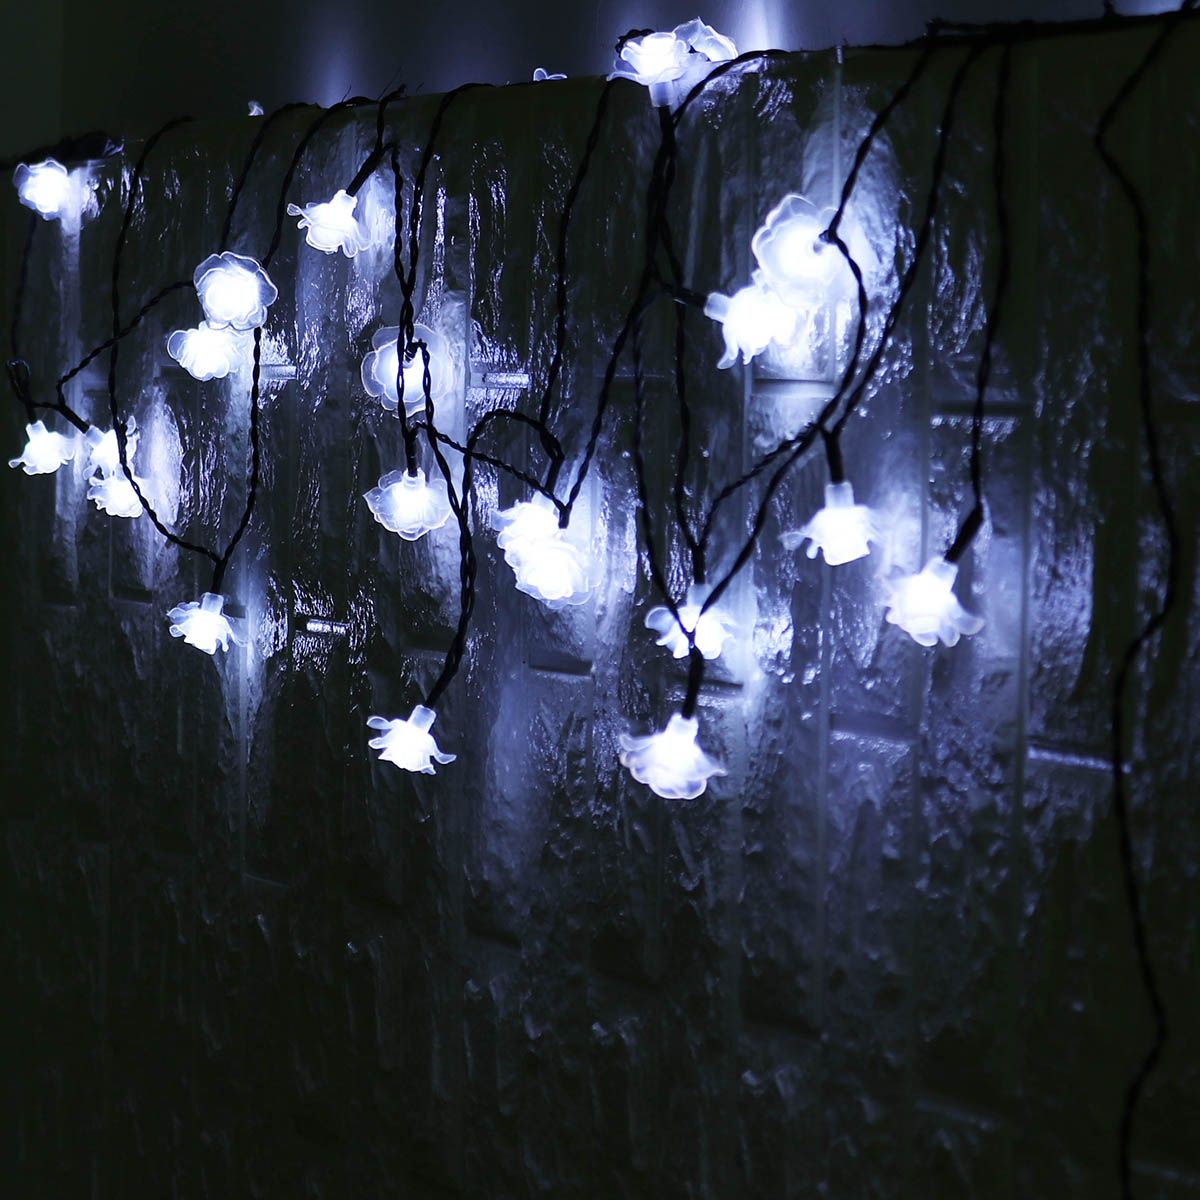 111222M-Solar-LED-String-Lights-Waterproof-Christmas-Party-Garden-Home-Decor-1764133